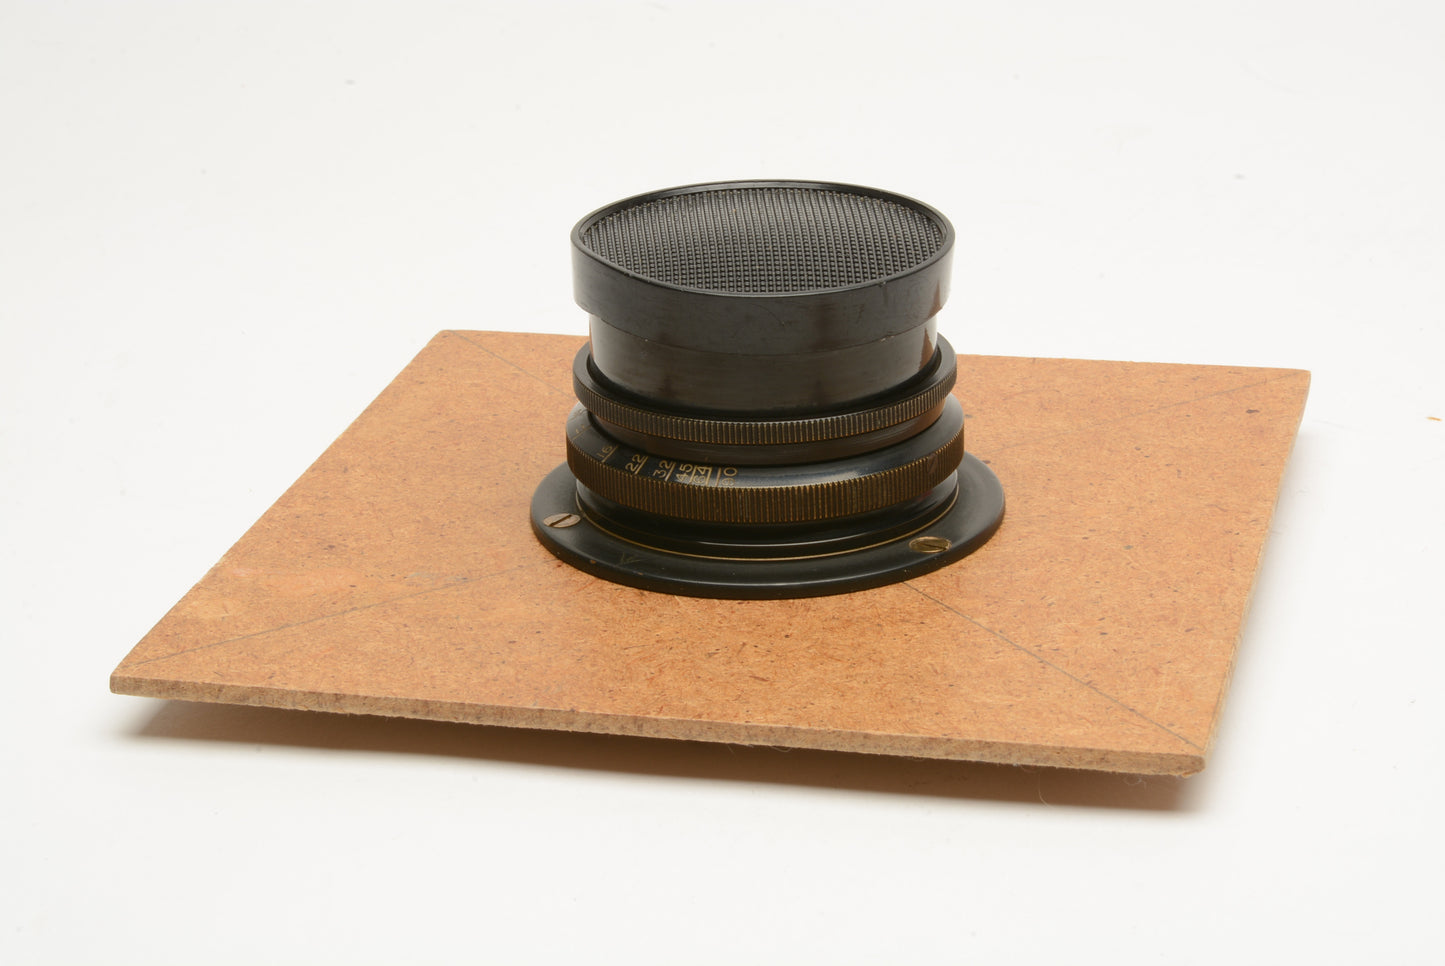 C. P. Goerz AM Optical Co Apochromat Artar 12" f9 brass large format lens on lens board and caps